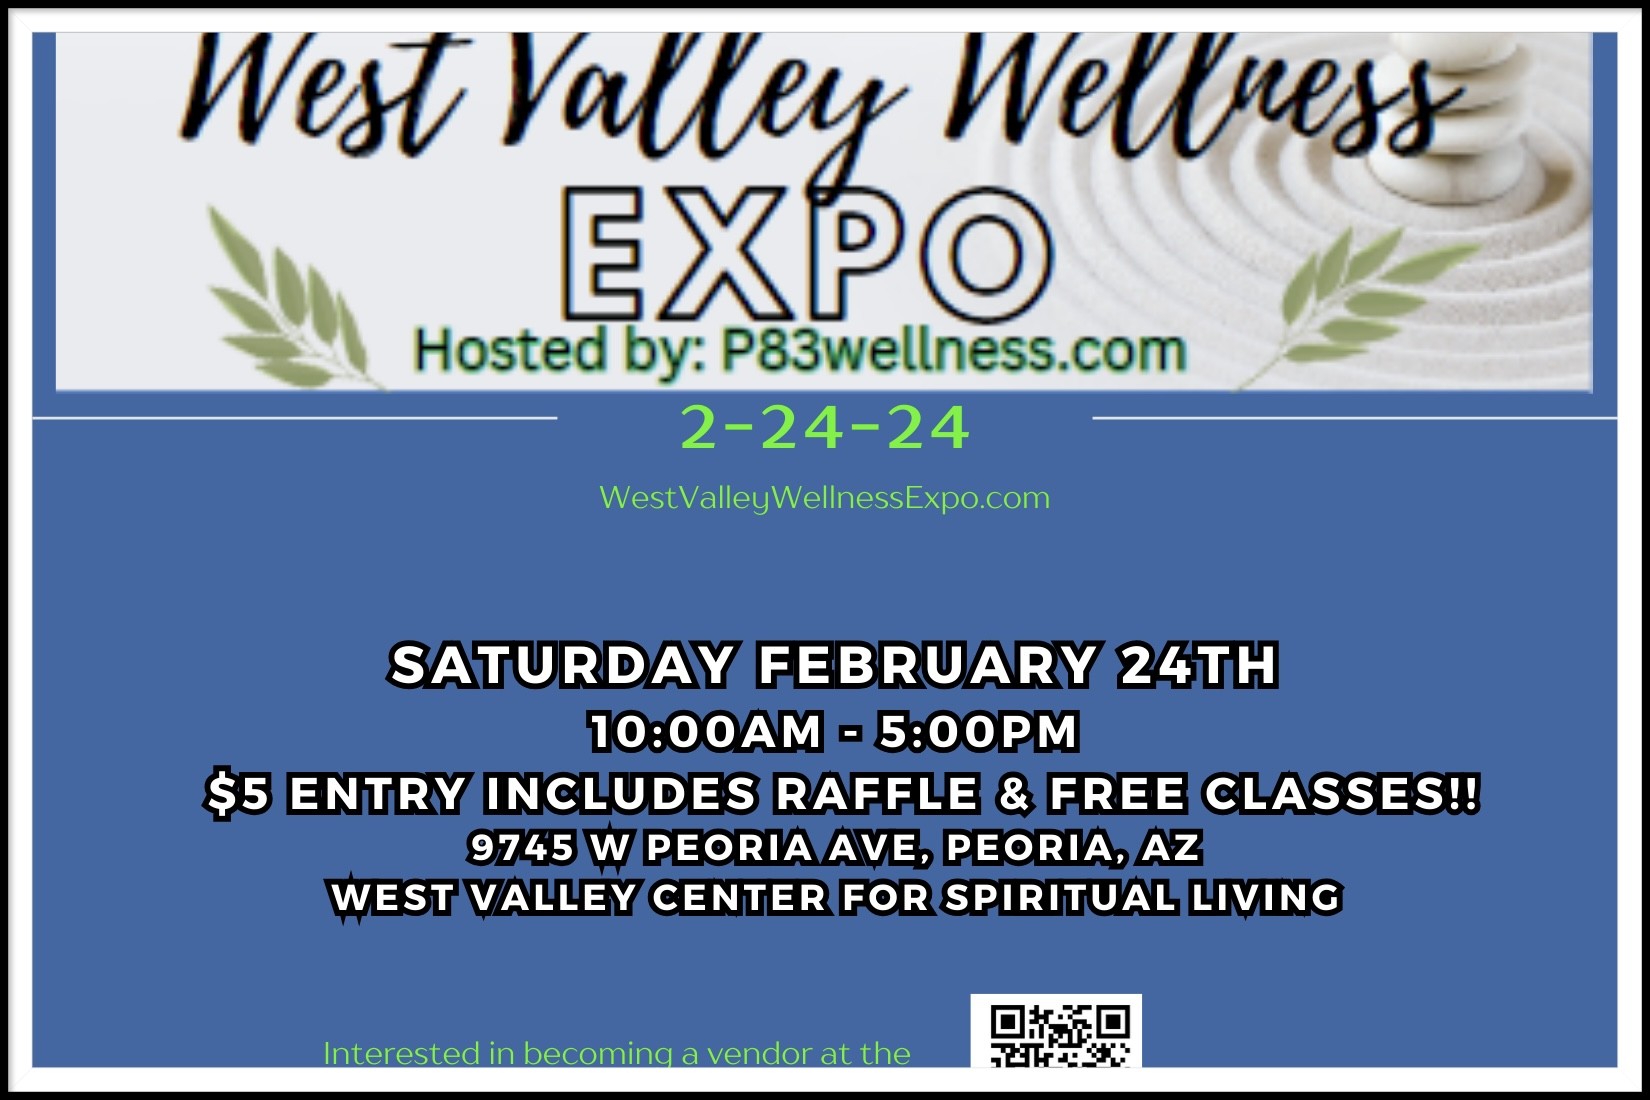 West Valley Wellness Expo 2-24-24